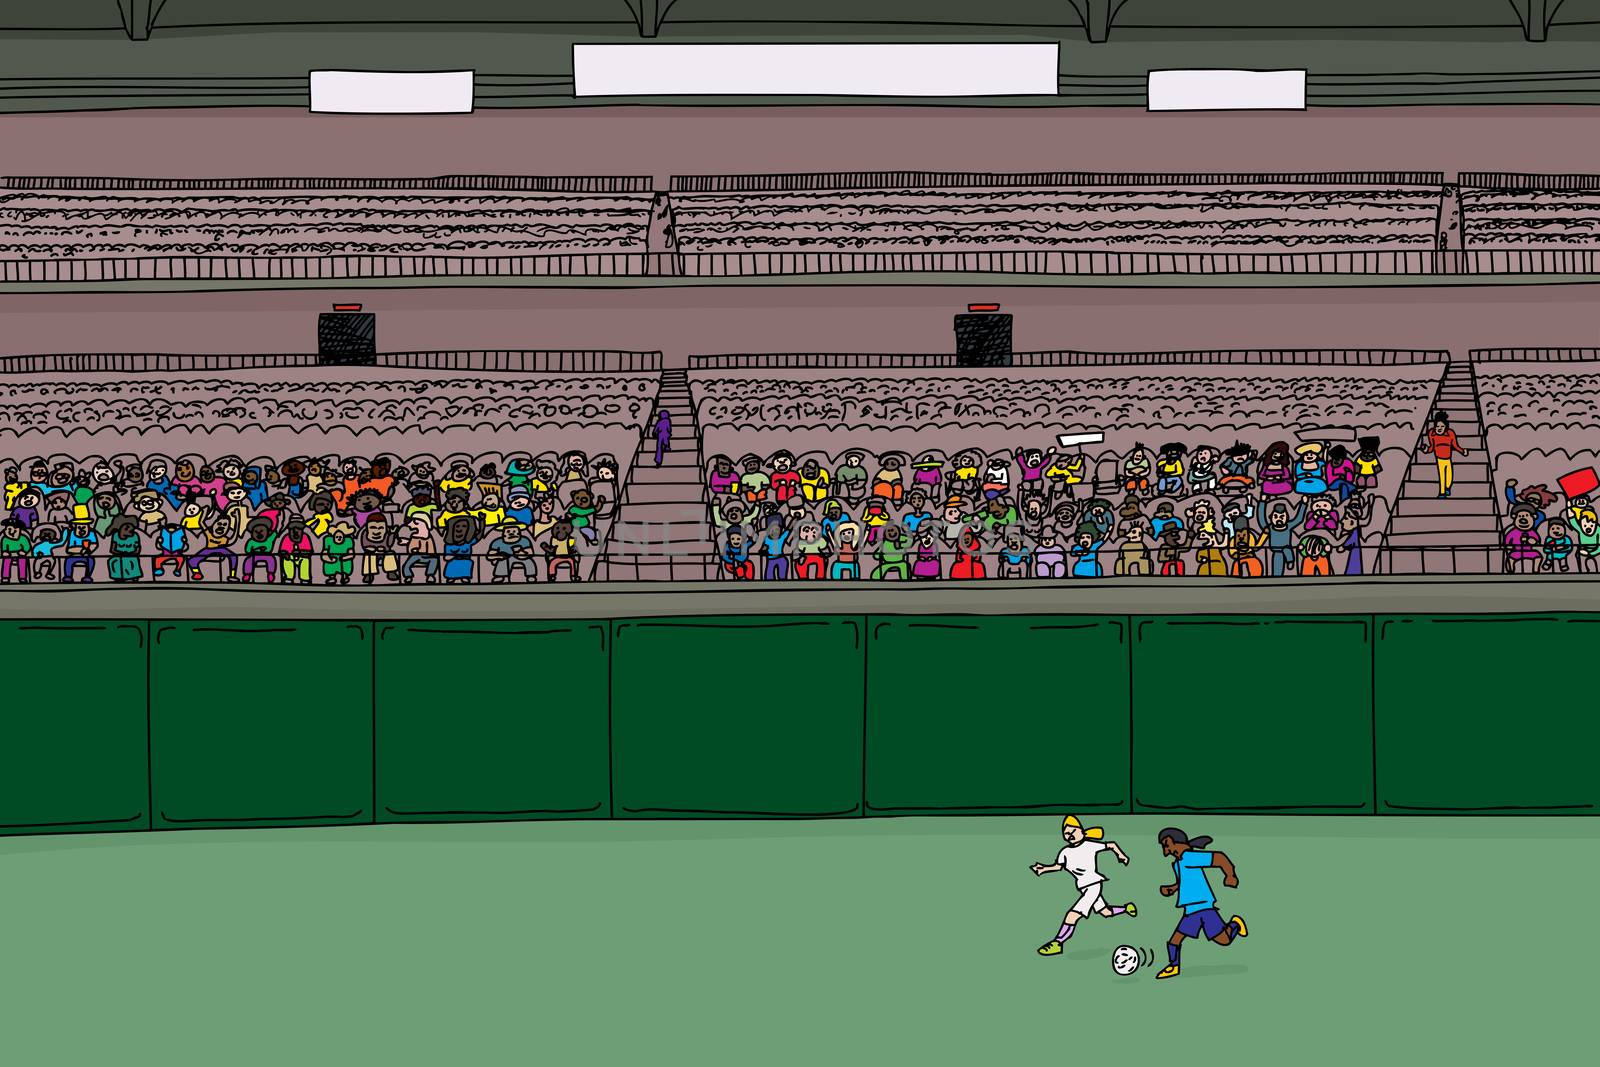 Illustration of soccer players running after ball at stadium with large diverse crowd under blank scoreboard